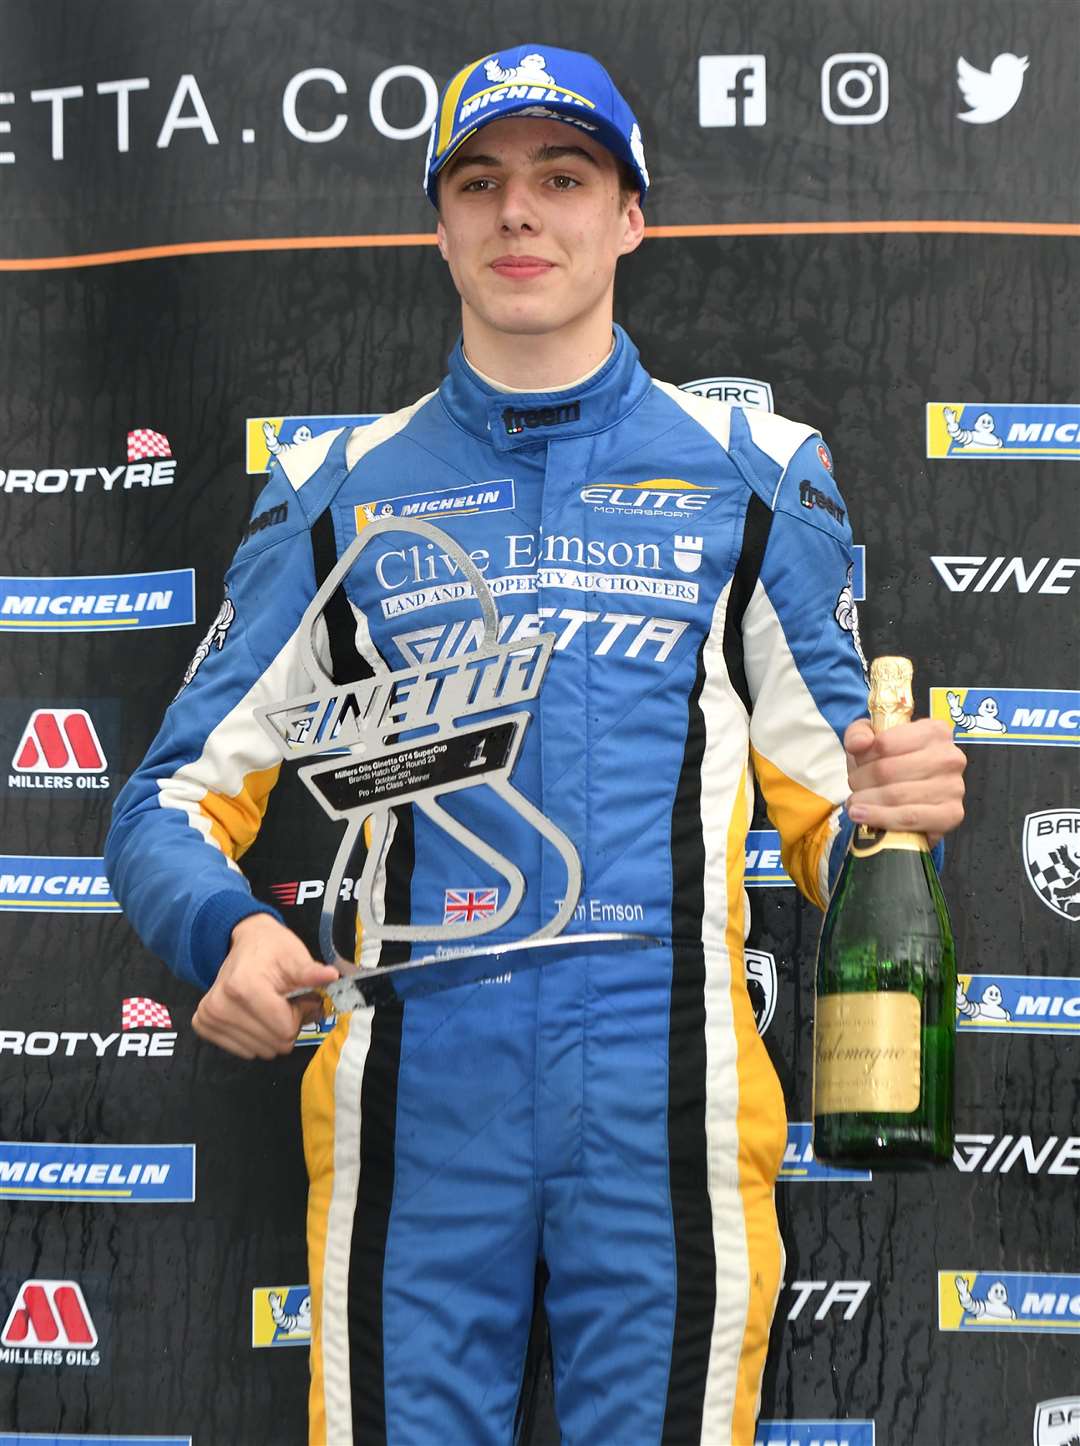 Tom Emson, from Hythe, grabbed his first Ginetta GT4 Supercup victory in the season finale